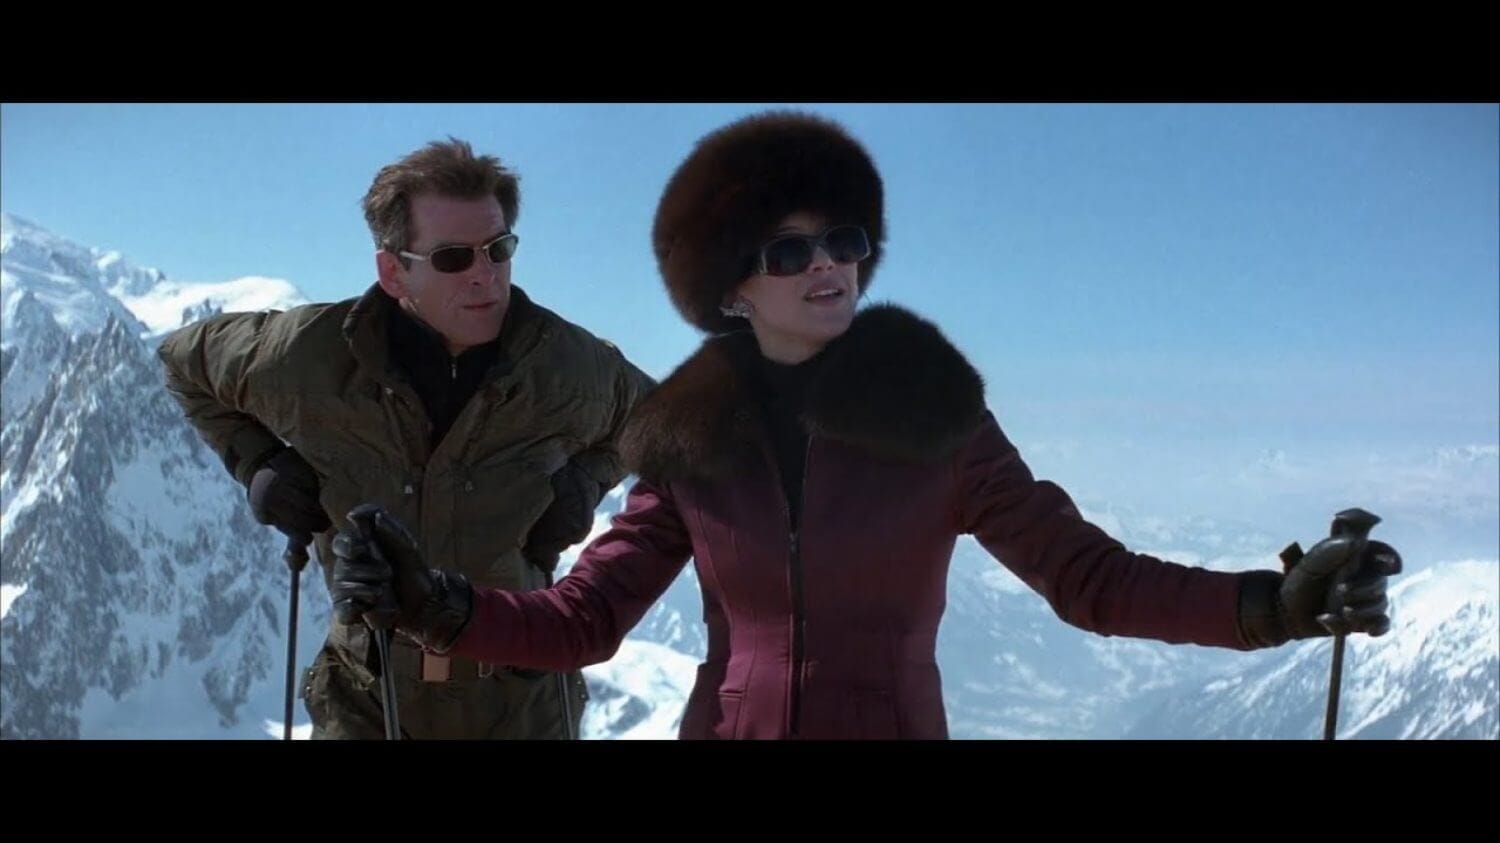 Mont-Blanc in the James Bond movie: The World is not enough